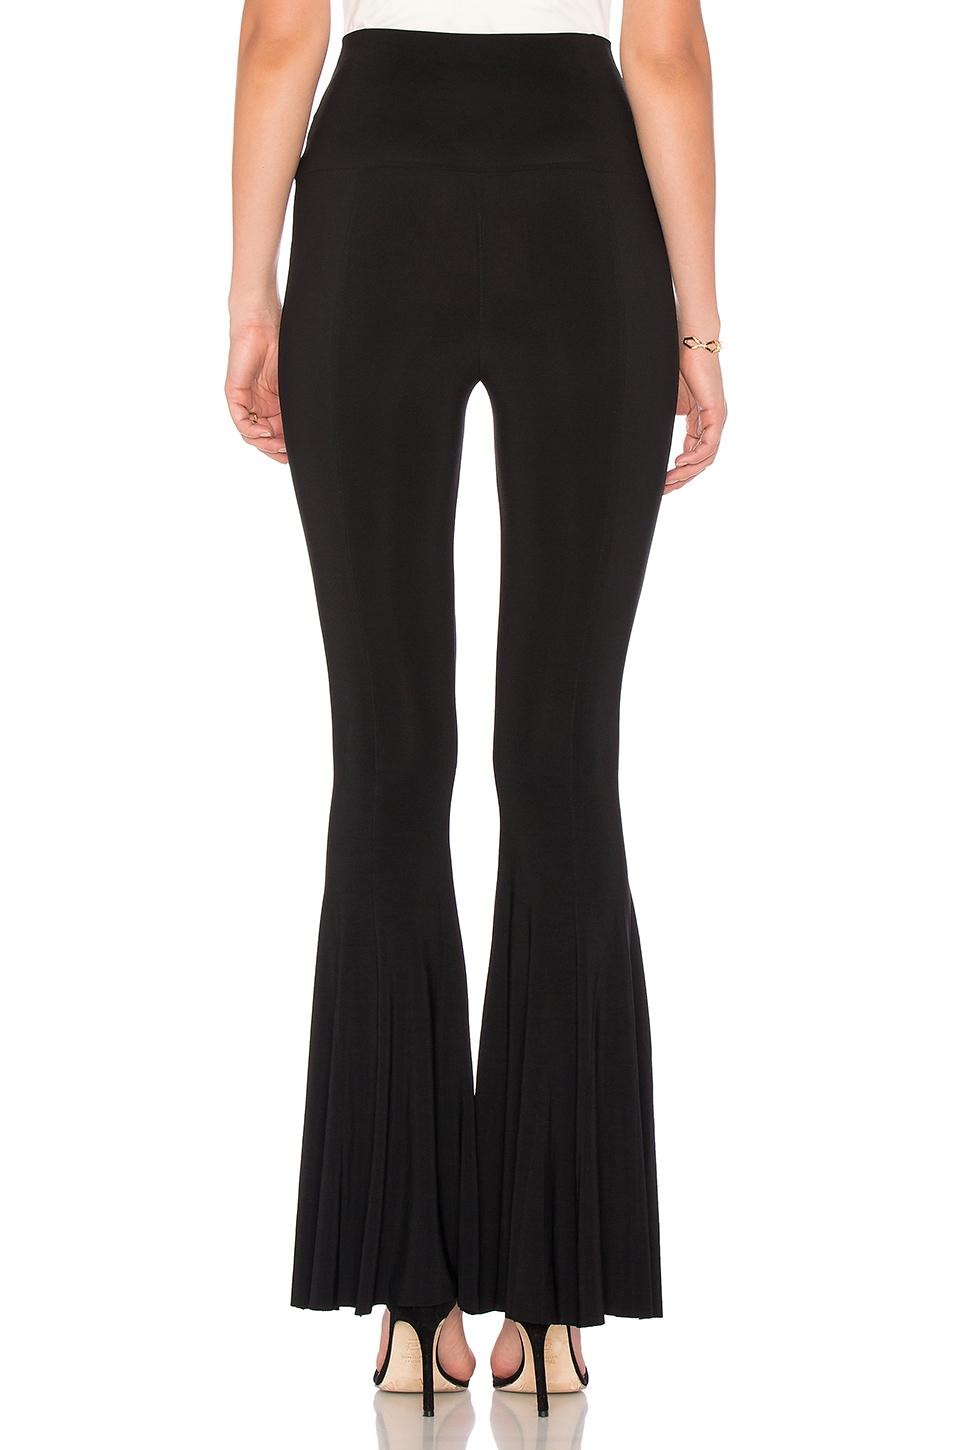 Norma Kamali Synthetic Fishtail Pant in Black - Lyst